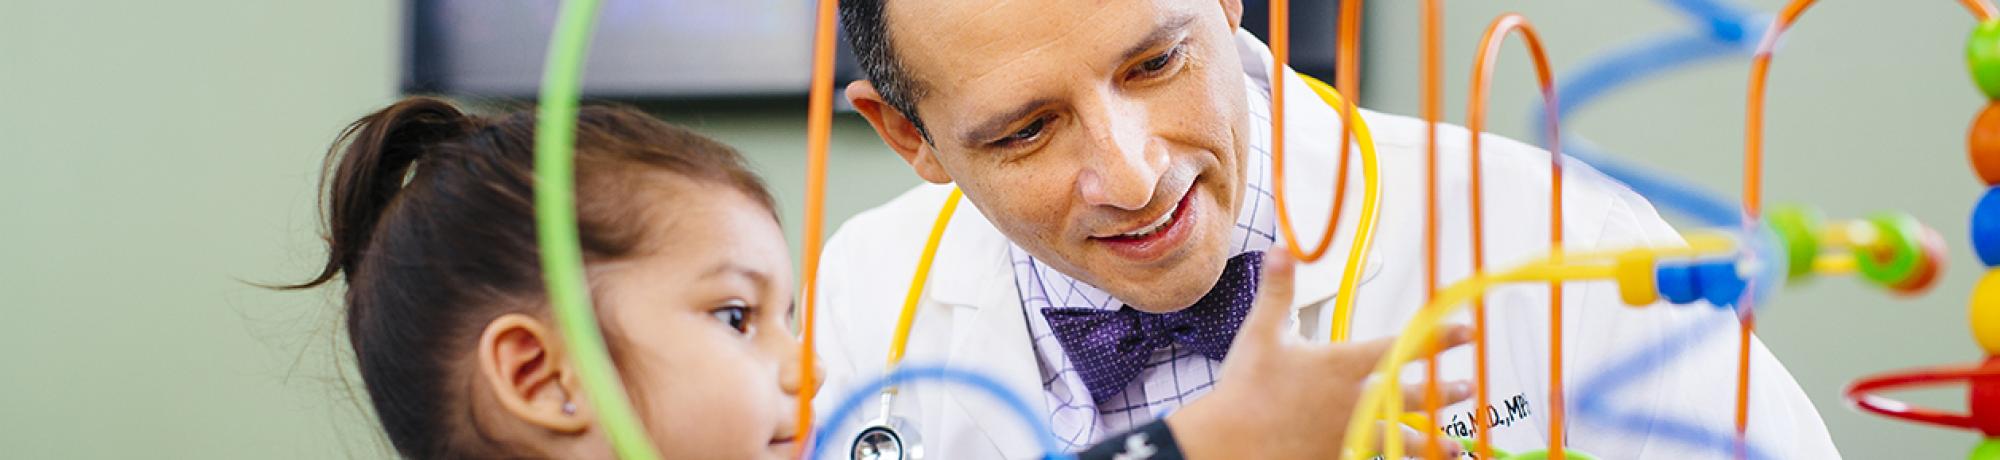 Doctor playing with pediatric patient